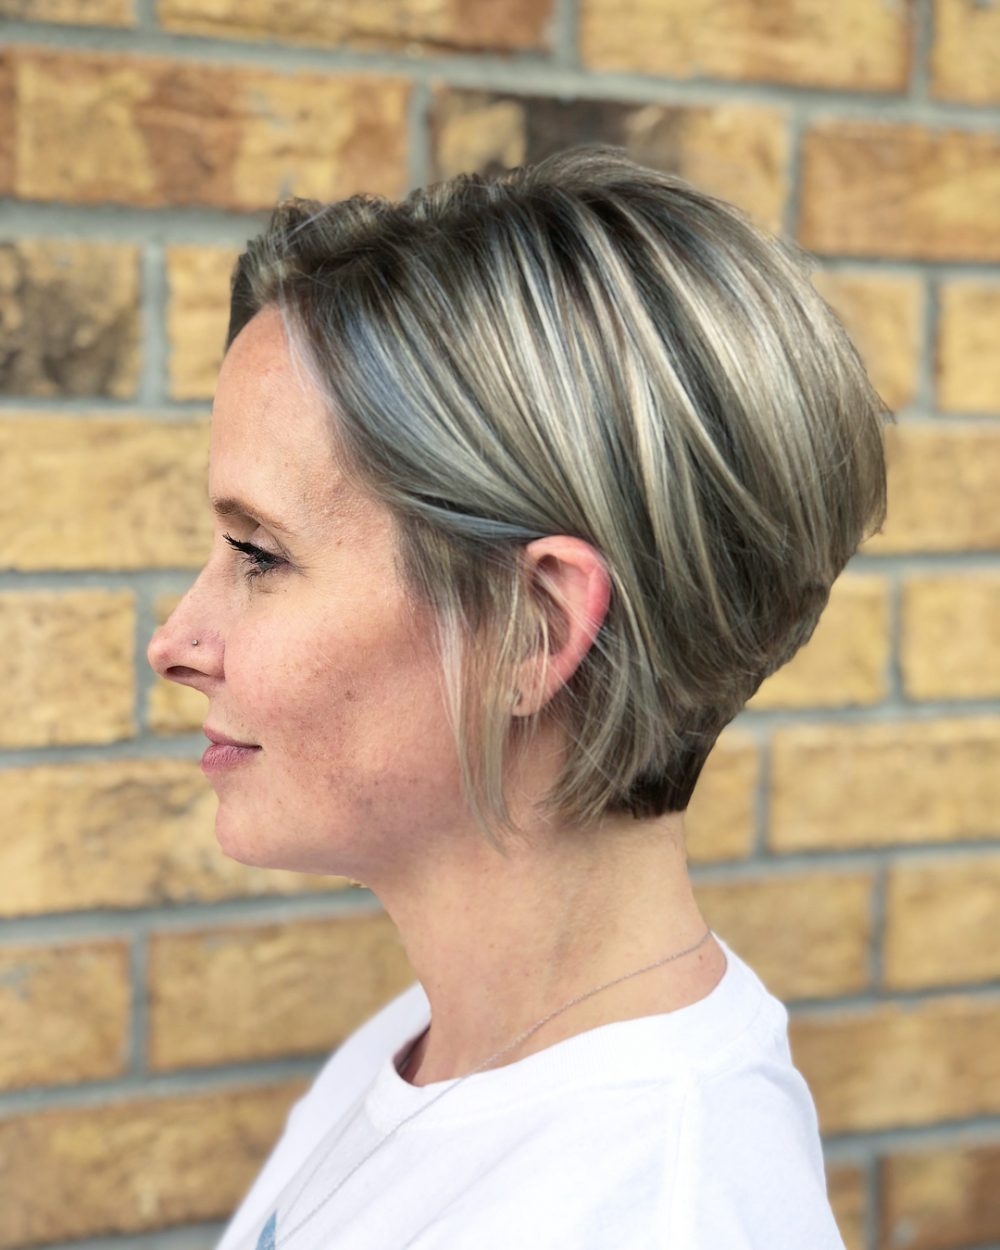  Blog - Stylish and Sexy Short Hairstyles & Haircuts for Women  Over 40